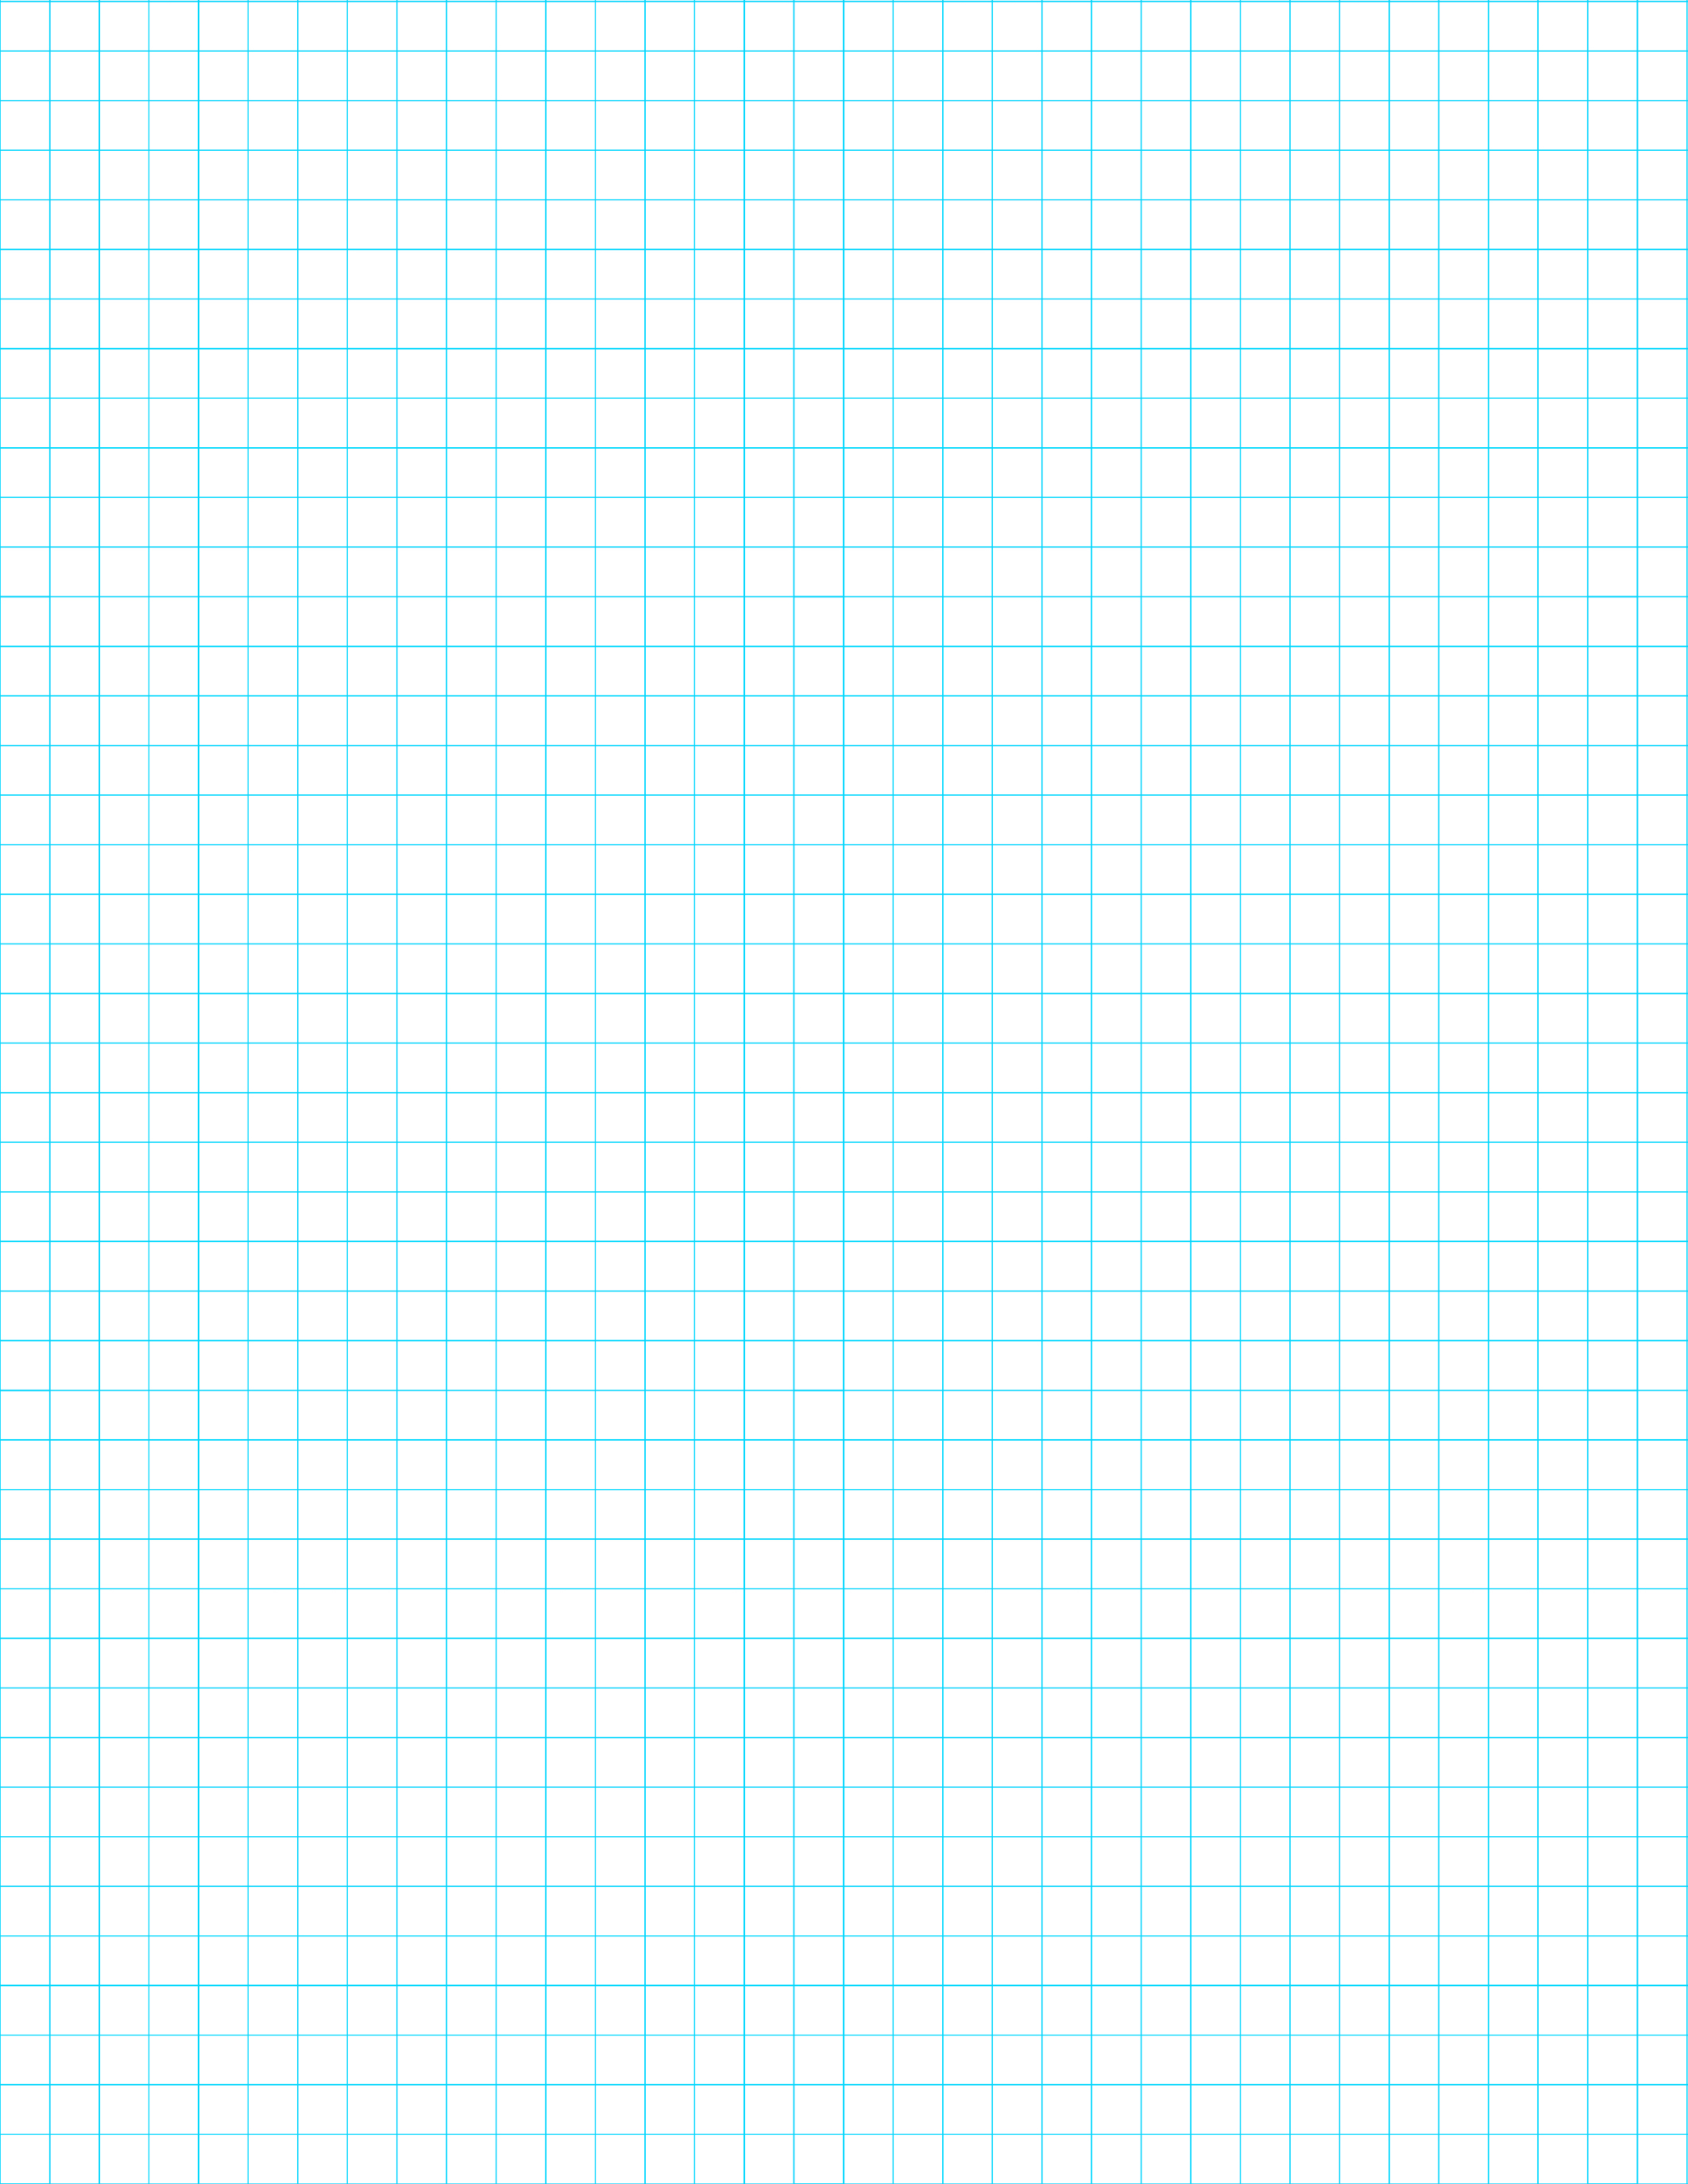 printable-1-8-inch-black-graph-paper-for-legal-paper-free-download-at